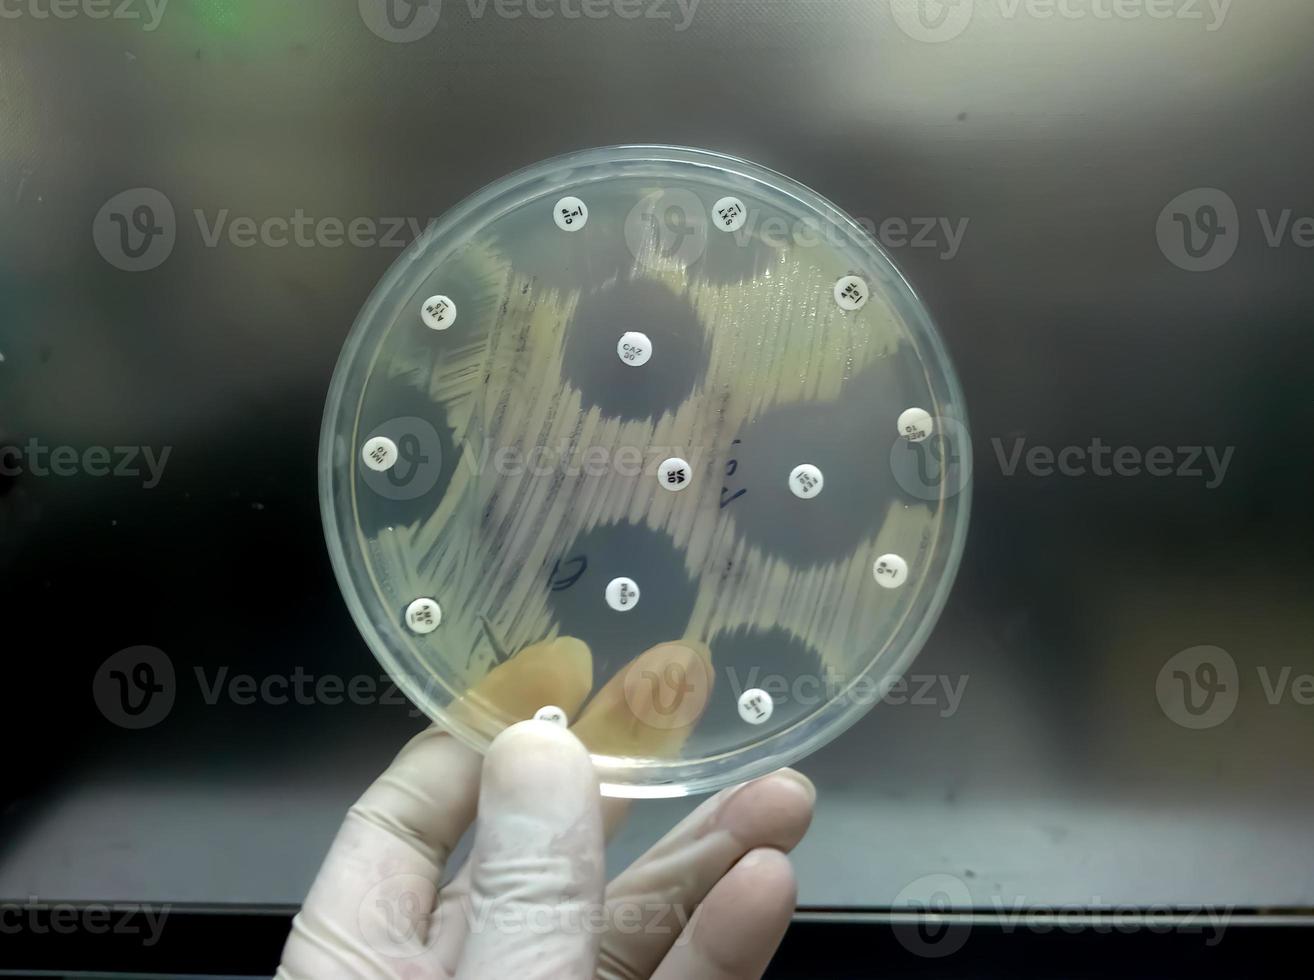 Antimicrobial susceptibility testing in petri dish. Antibiotic resistance of bacteria photo